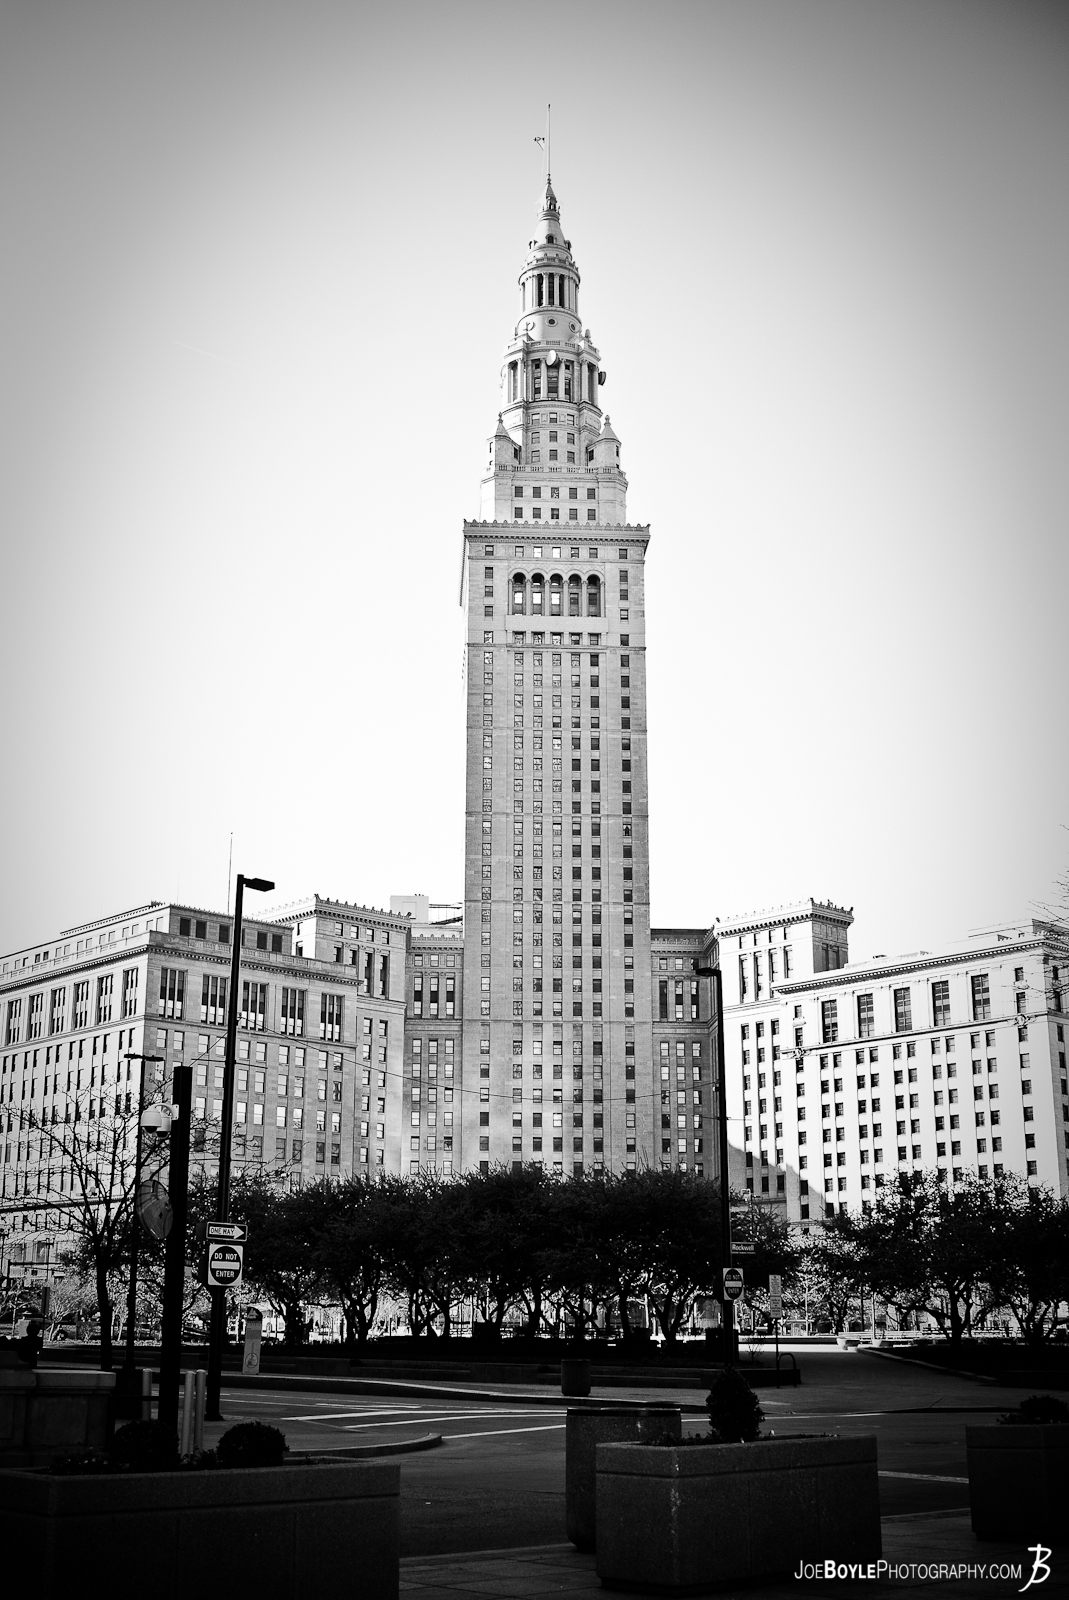   I took this photo of the Terminal Tower on a nice, warm, sunny day! I was on a "photo scavenger hunt" to find the best picture I could of this Cleveland landmark. 